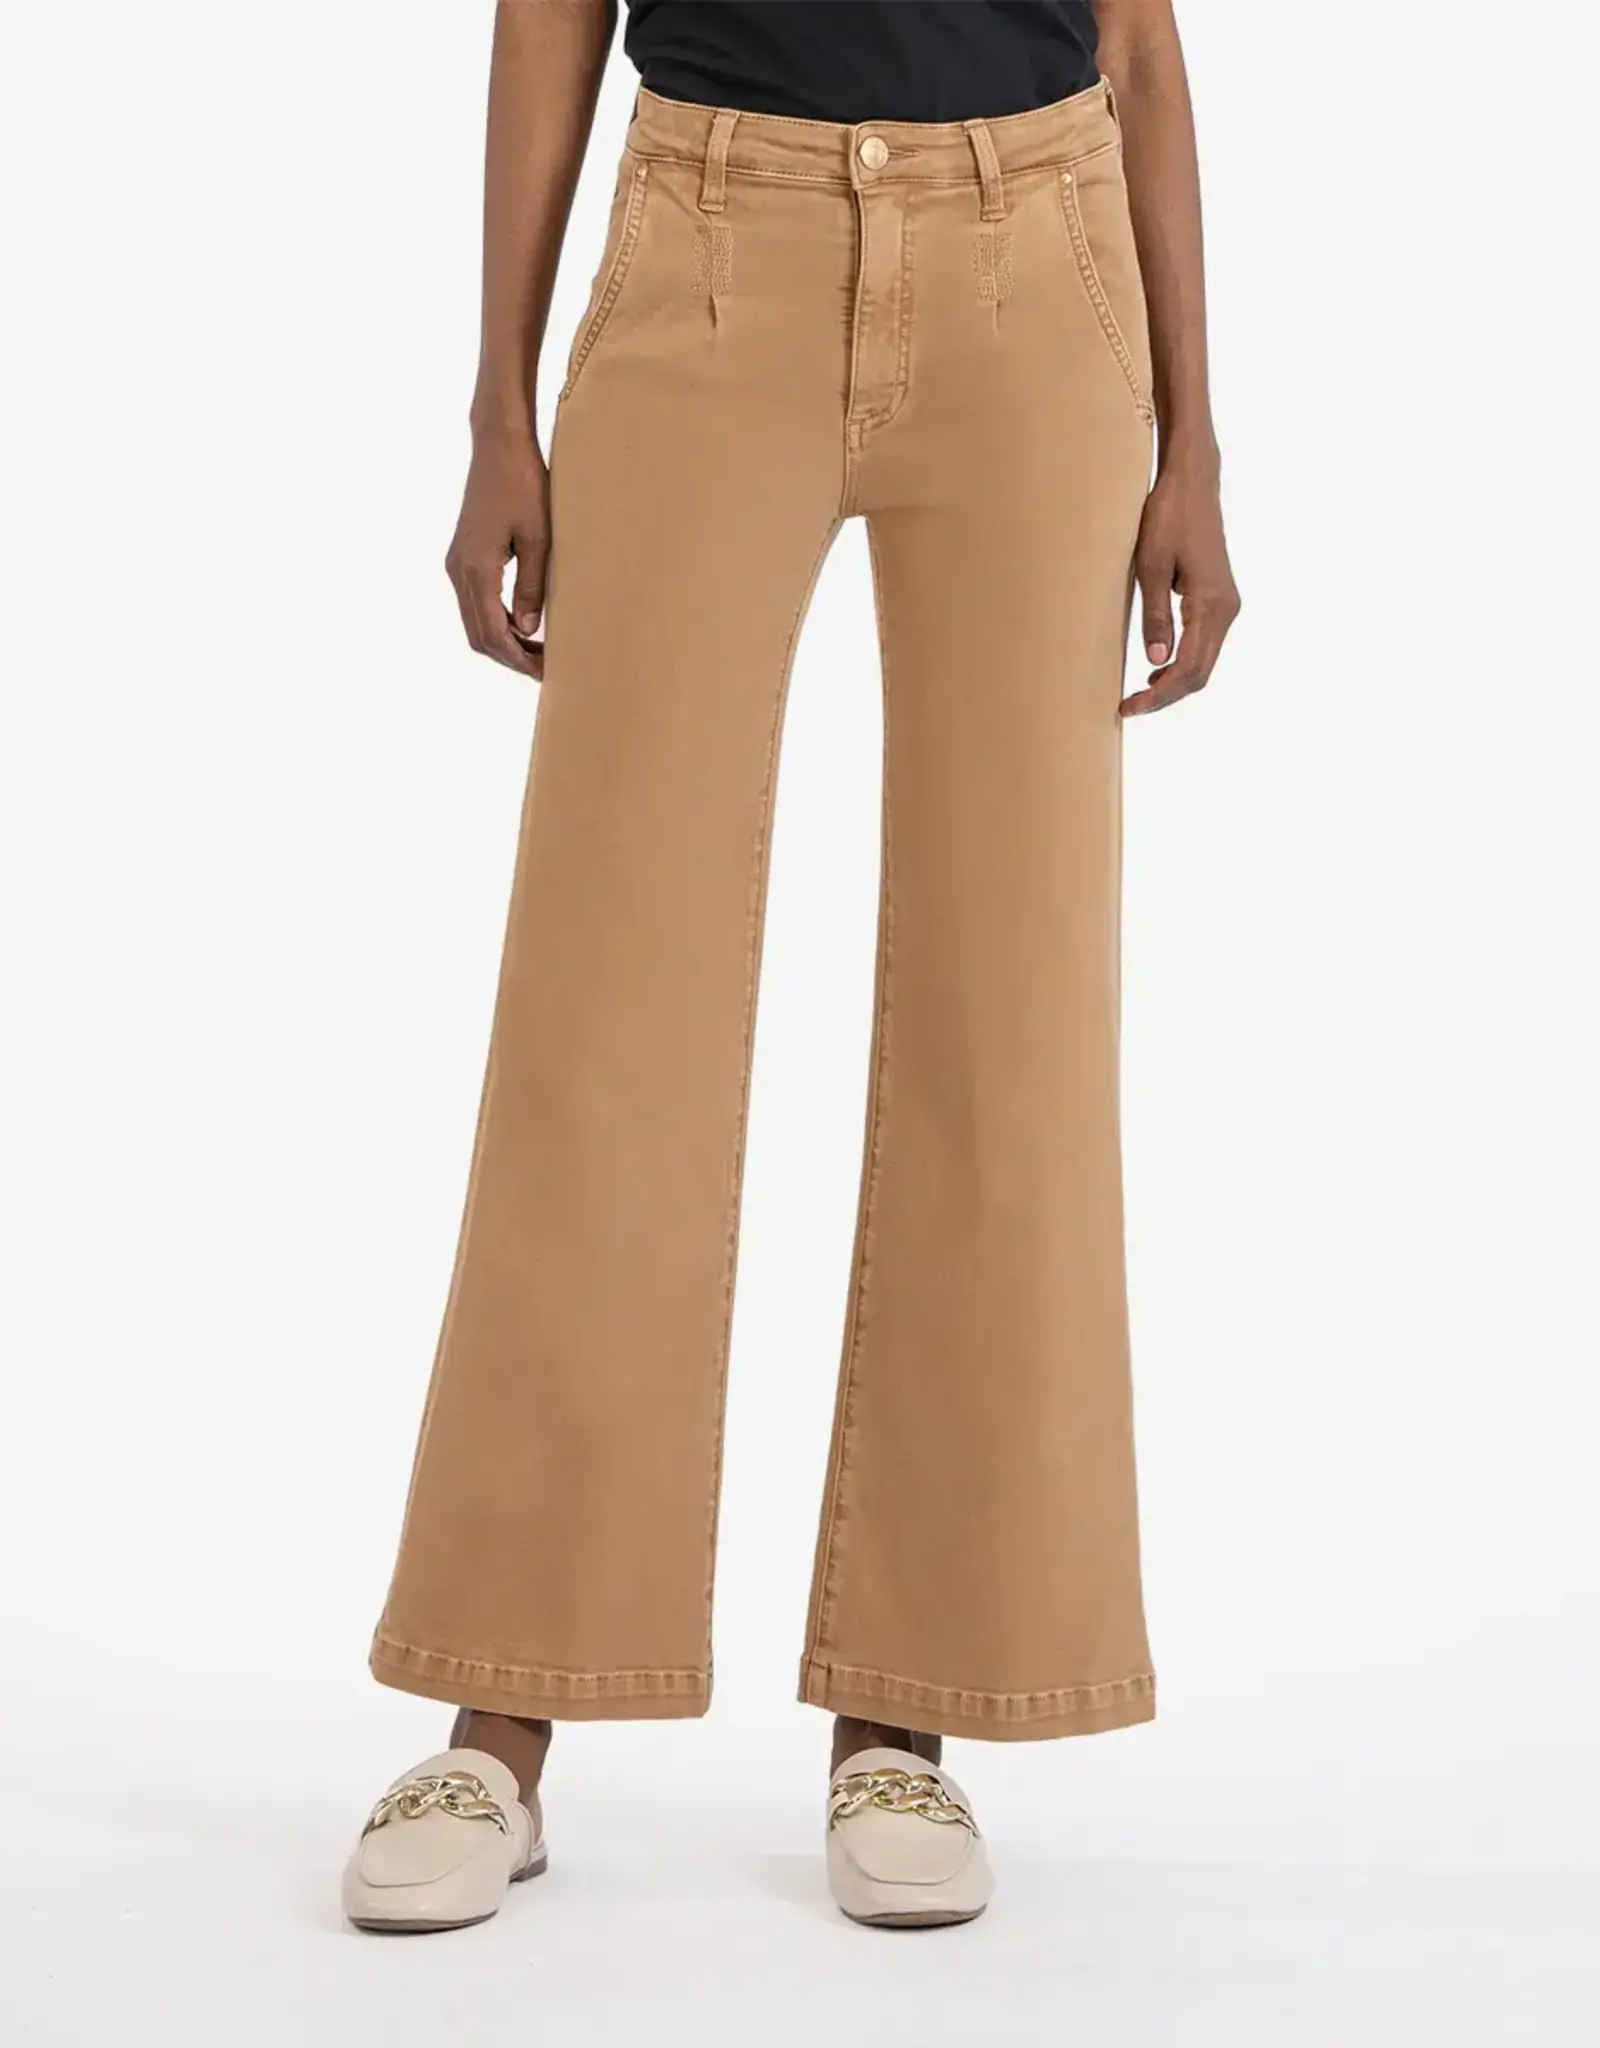 Kut From the Kloth Meg High Rise Ankle Wide Leg Toffee